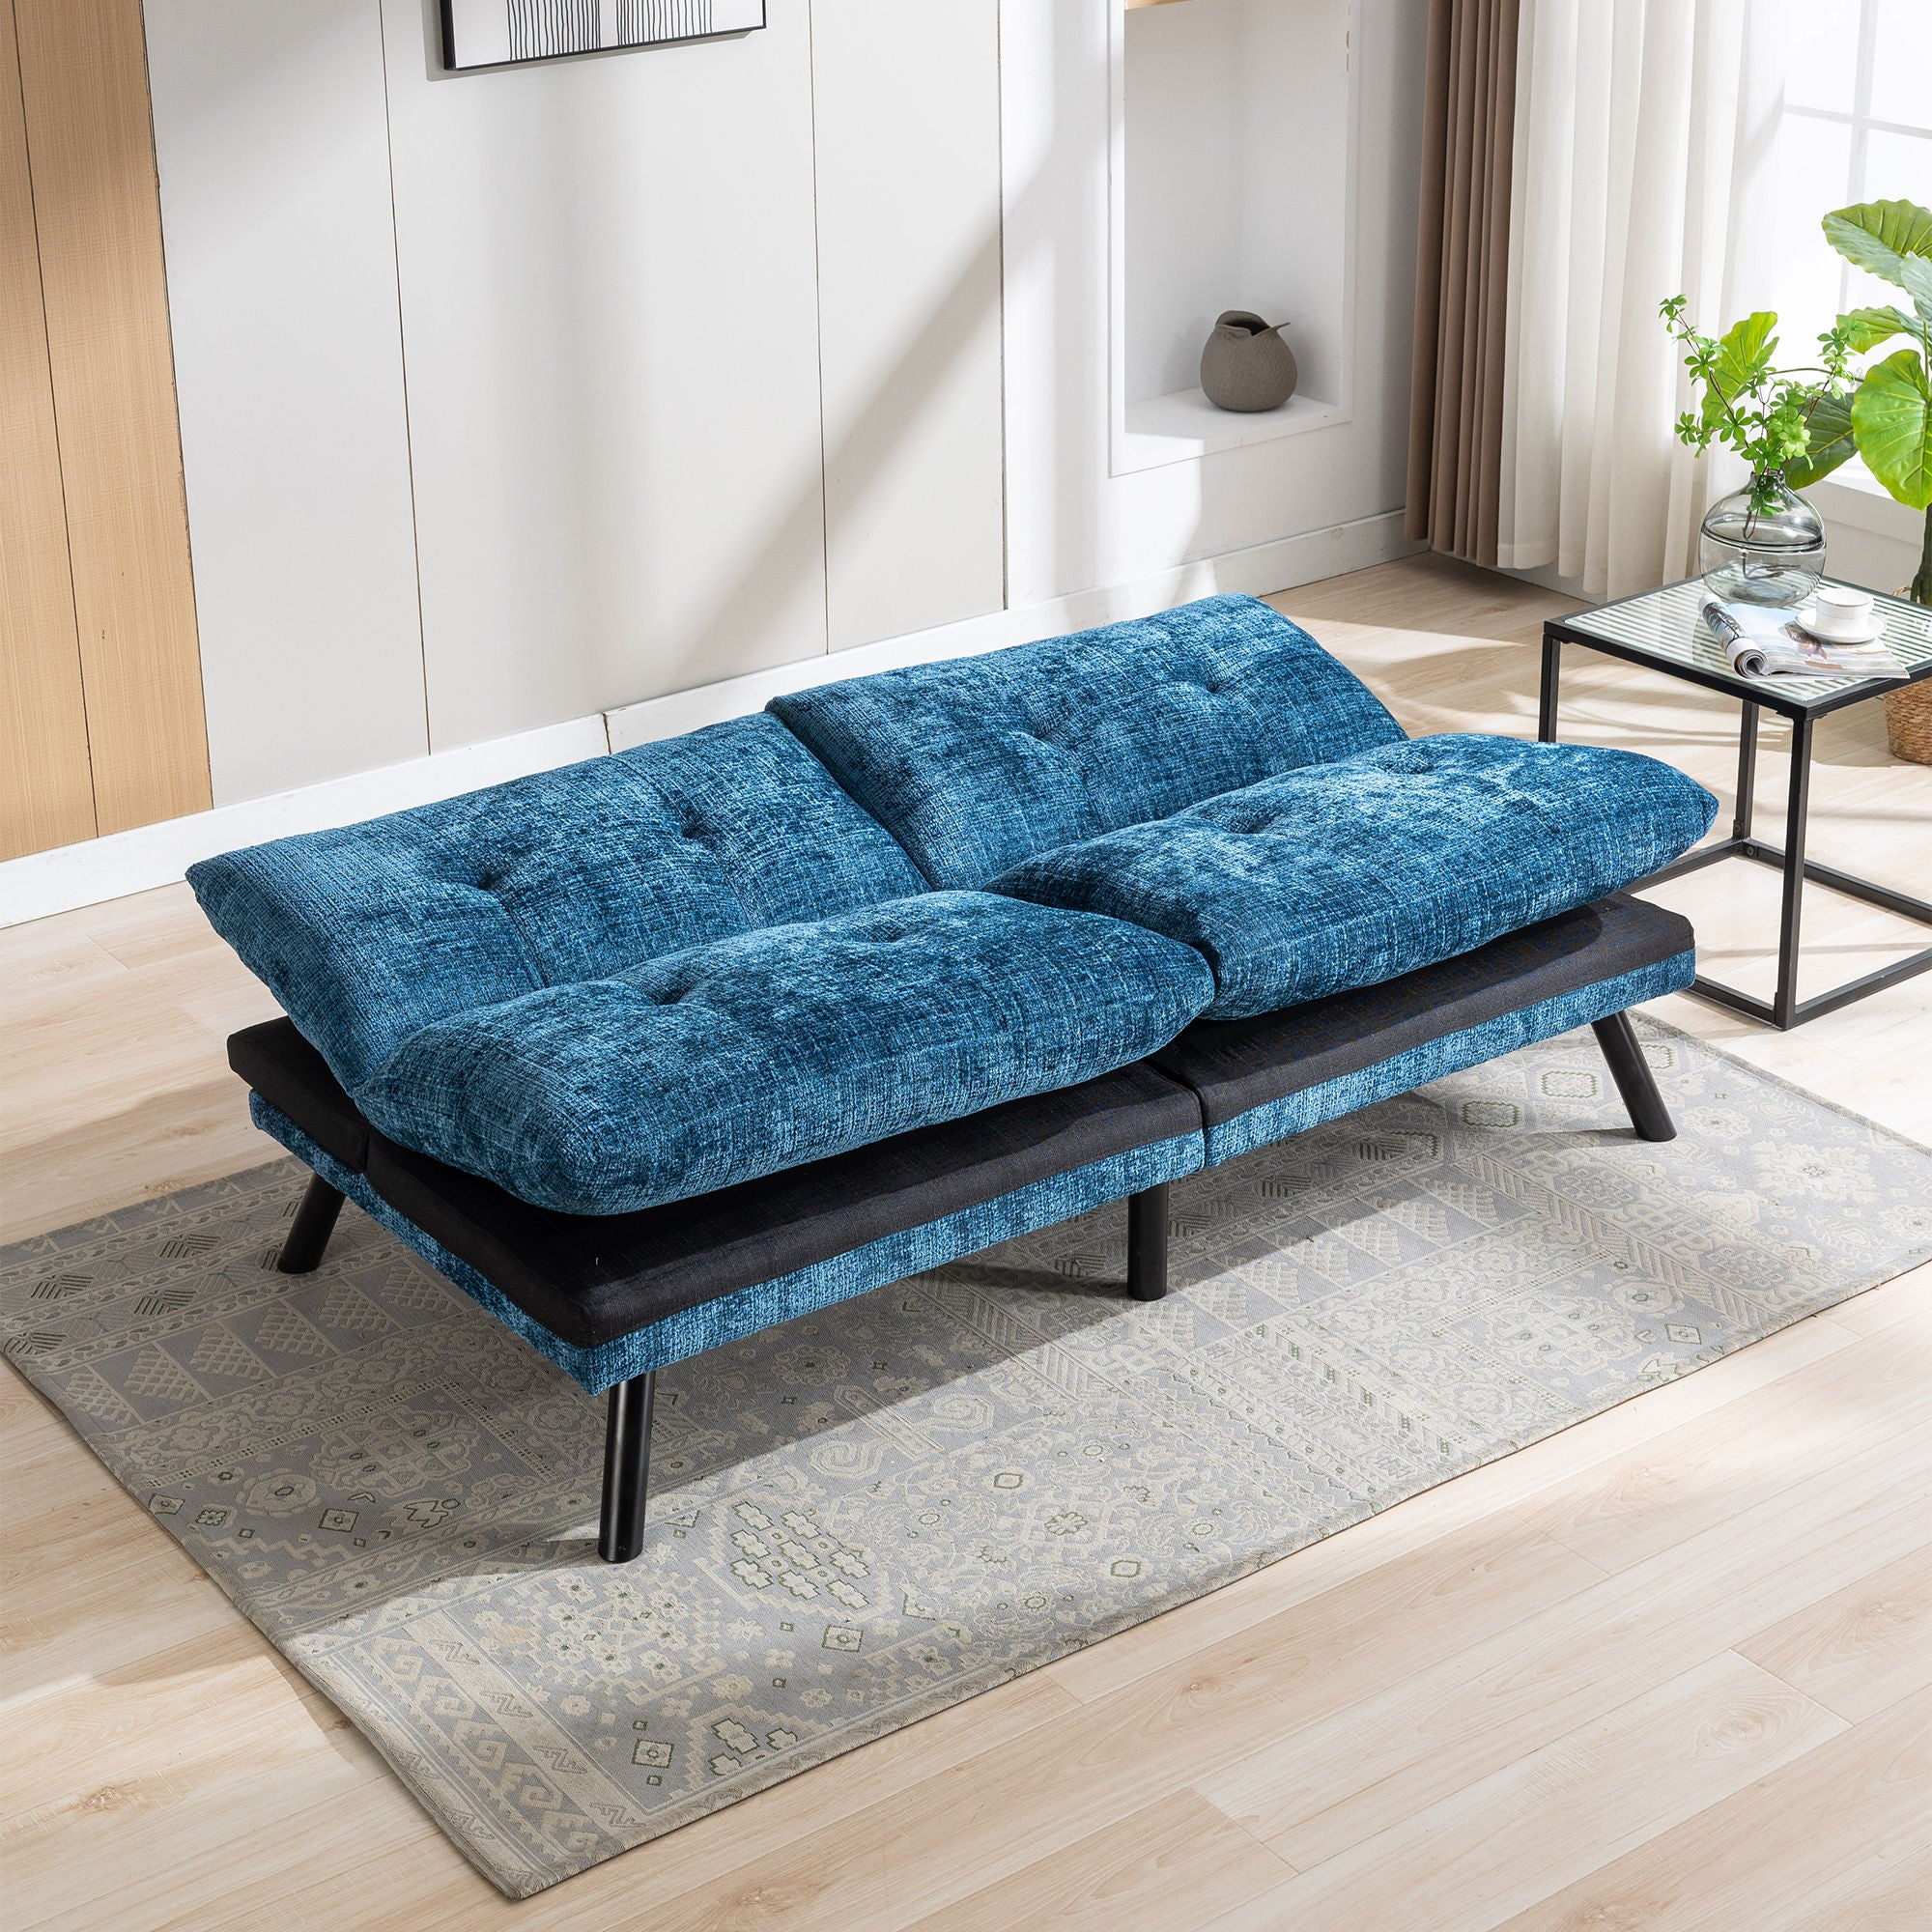 Convertible Sofa Bed Loveseat Futon Bed Breathable Adjustable Lounge Couch With Metal Legs, Futon Sets For Compact Living Space Chenille-Blue